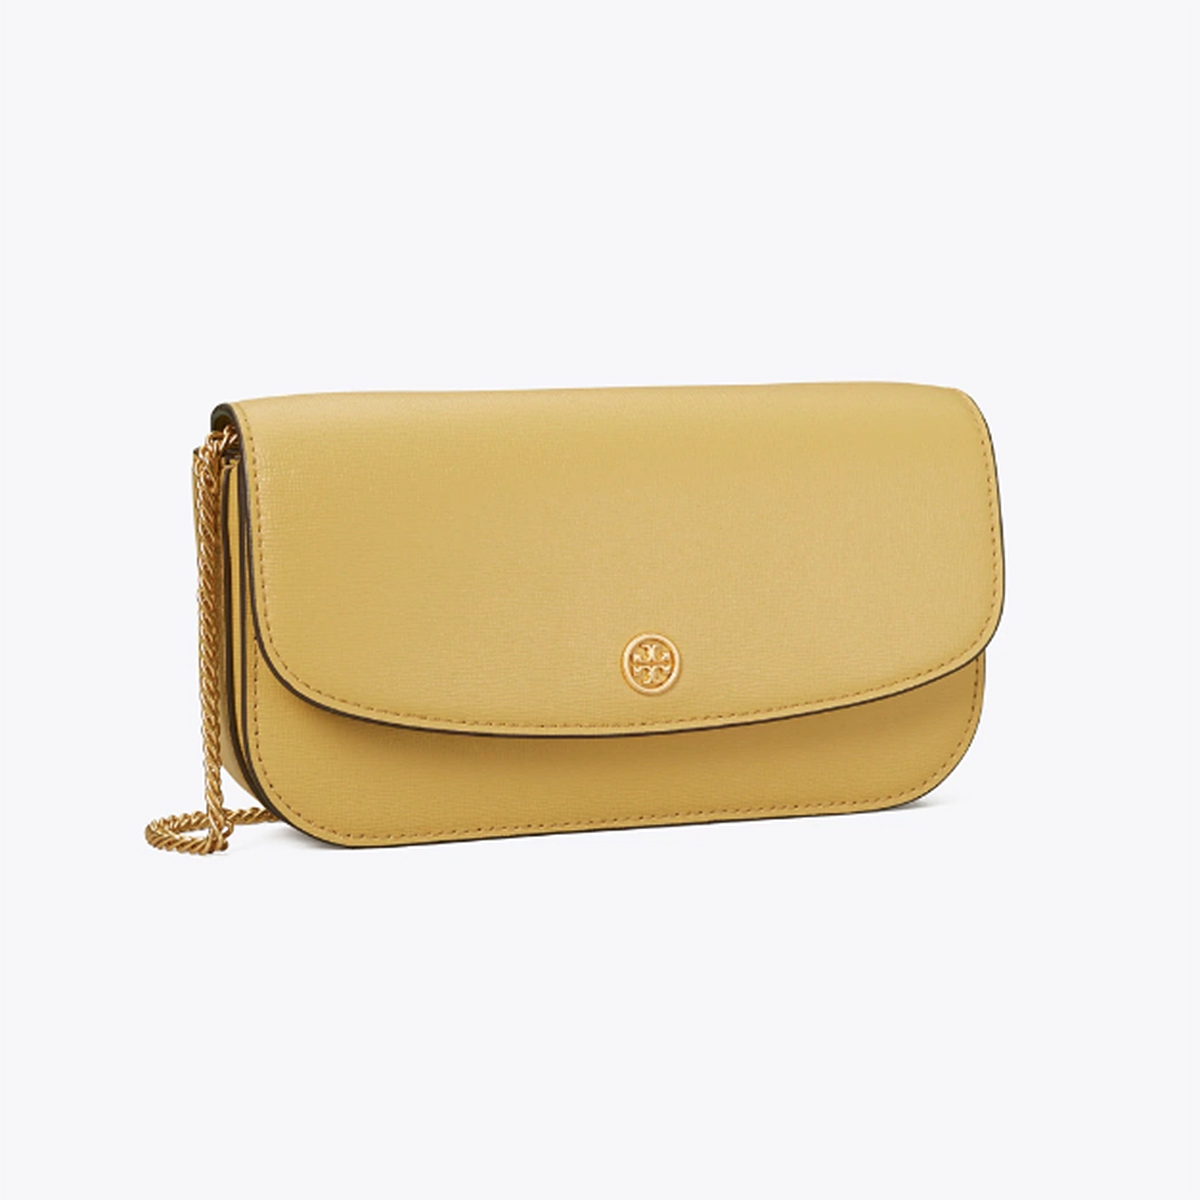 Tory Burch Has So Many Bags and Accessories on Sale | Us Weekly